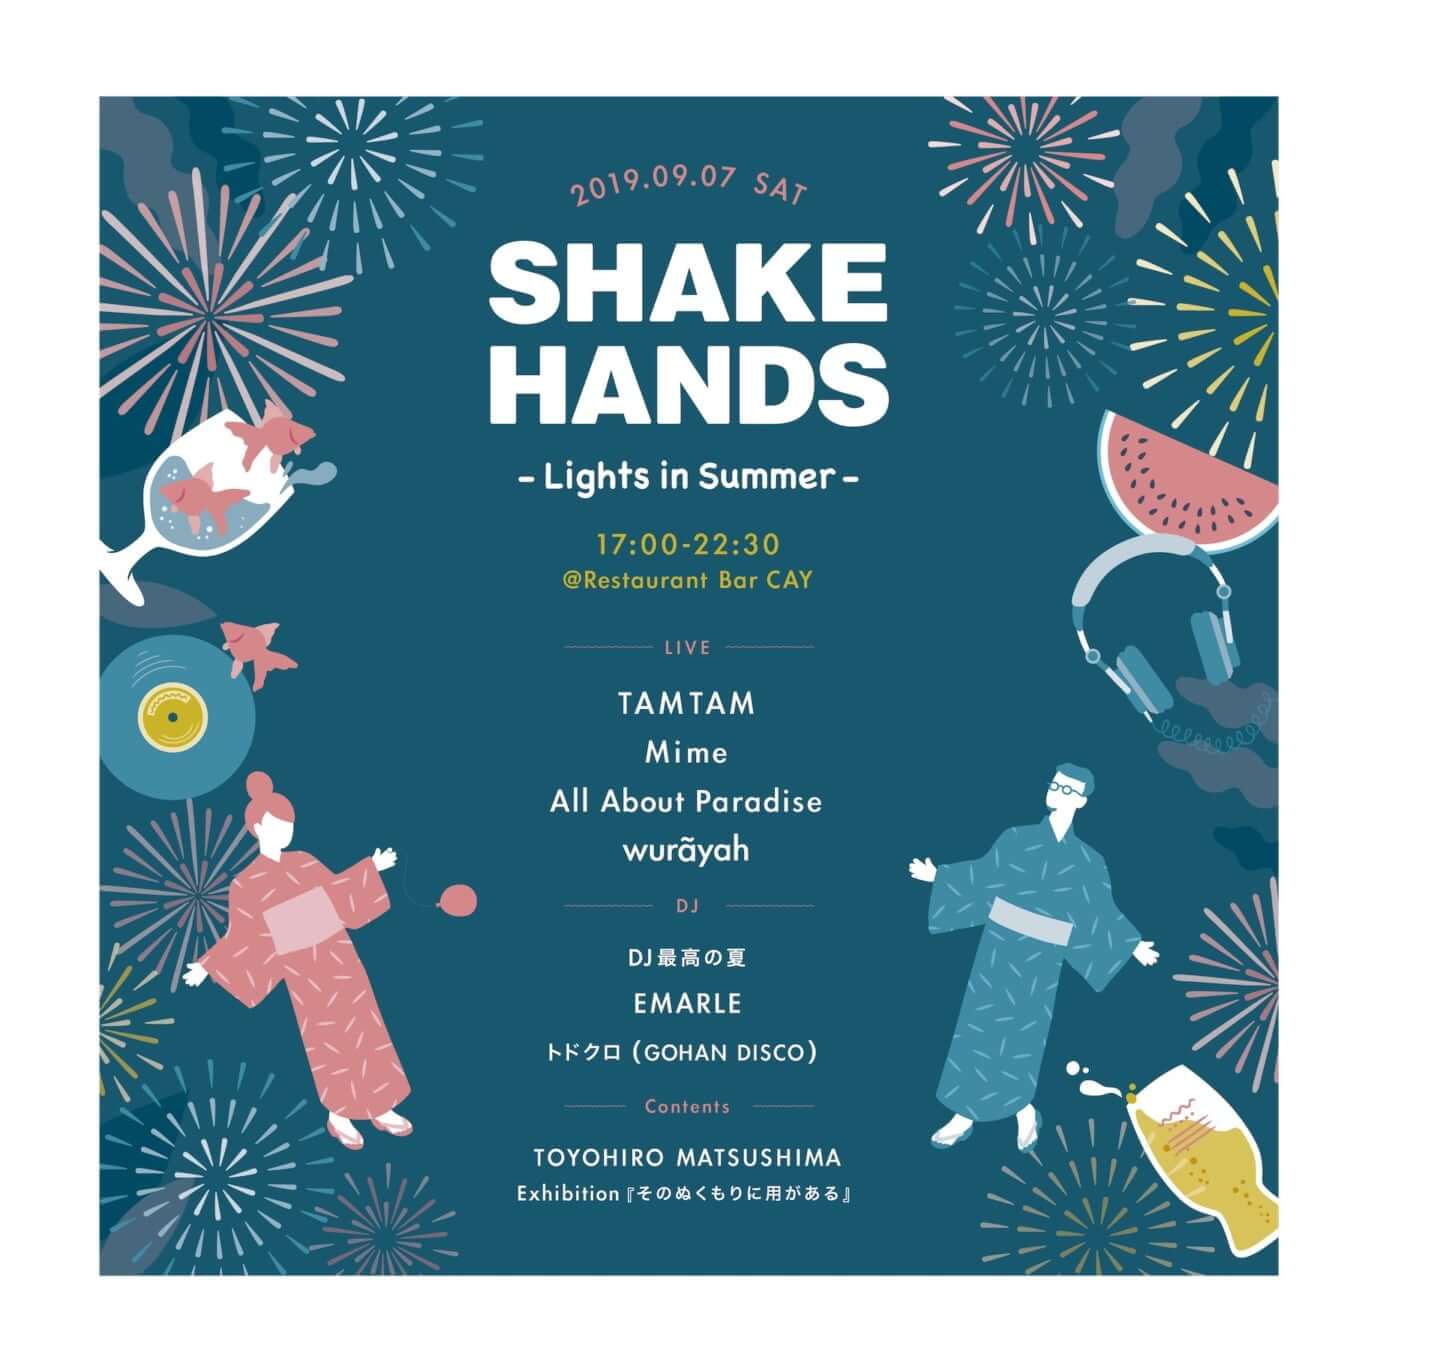 Restaurant Bar CAYで＜SHAKE HANDS＞開催｜TAMTAM、All About Paradise、EMARLEらが出演決定 23282aad2ab05e2c4a1d21e5c4ab1c1e-1440x1354